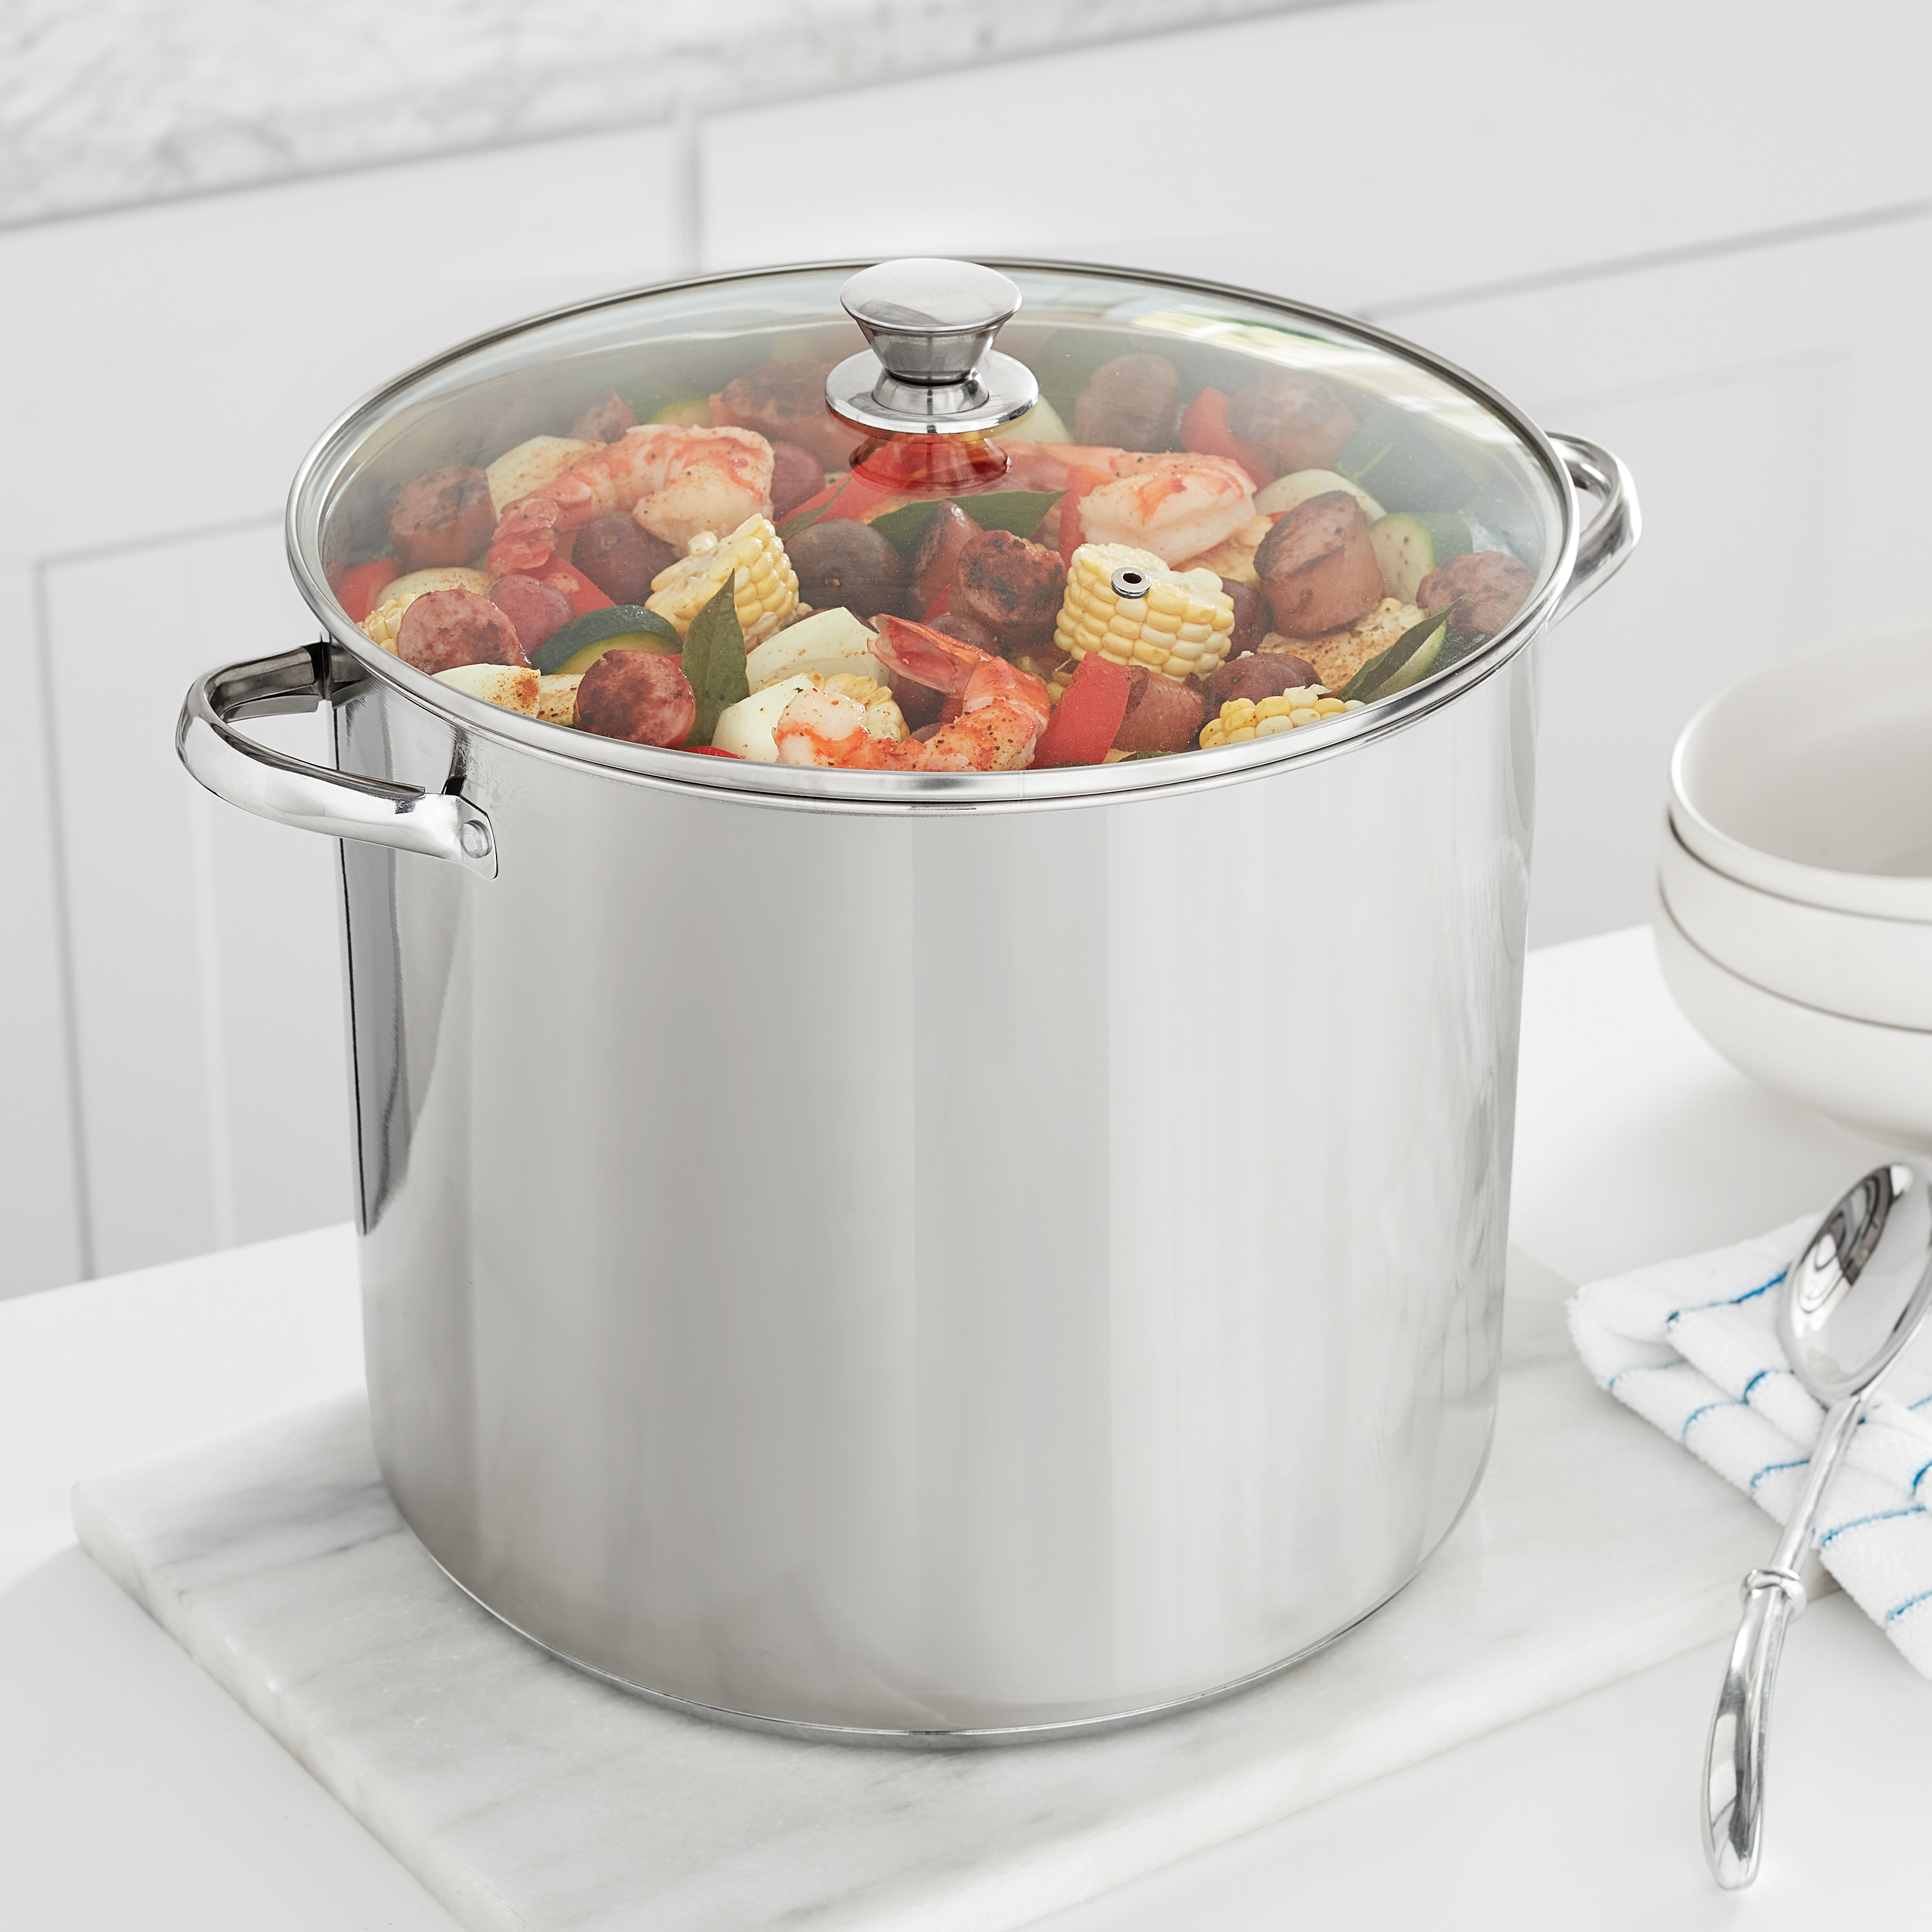 Mainstays Stainless Steel 20-Quart Stock Pot with Glass Lid - image 3 of 6